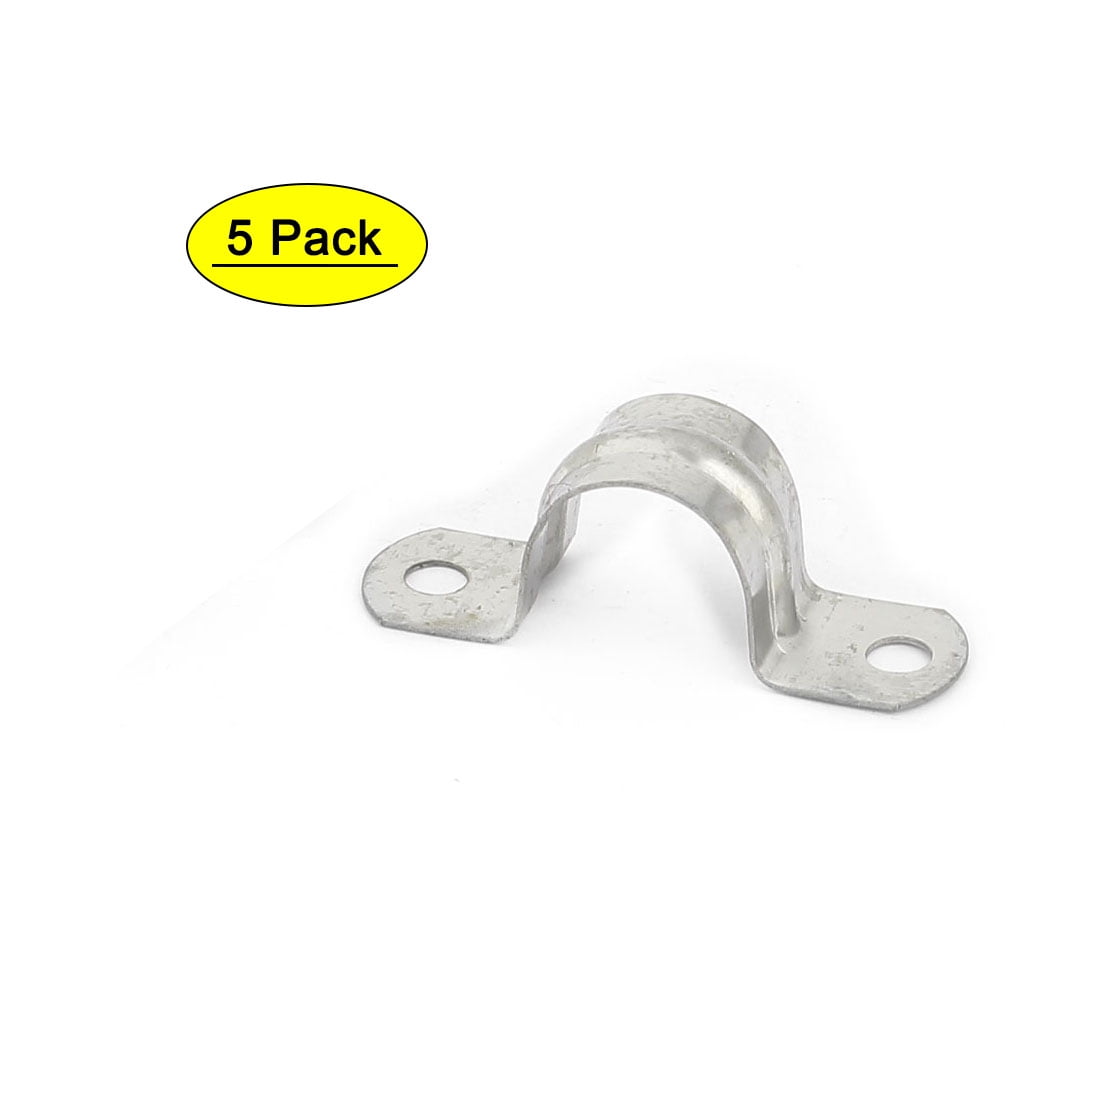 2pcs 100mm Arch High Stainless Steel Pipe Strap U Clamp Clip Silver Tone 